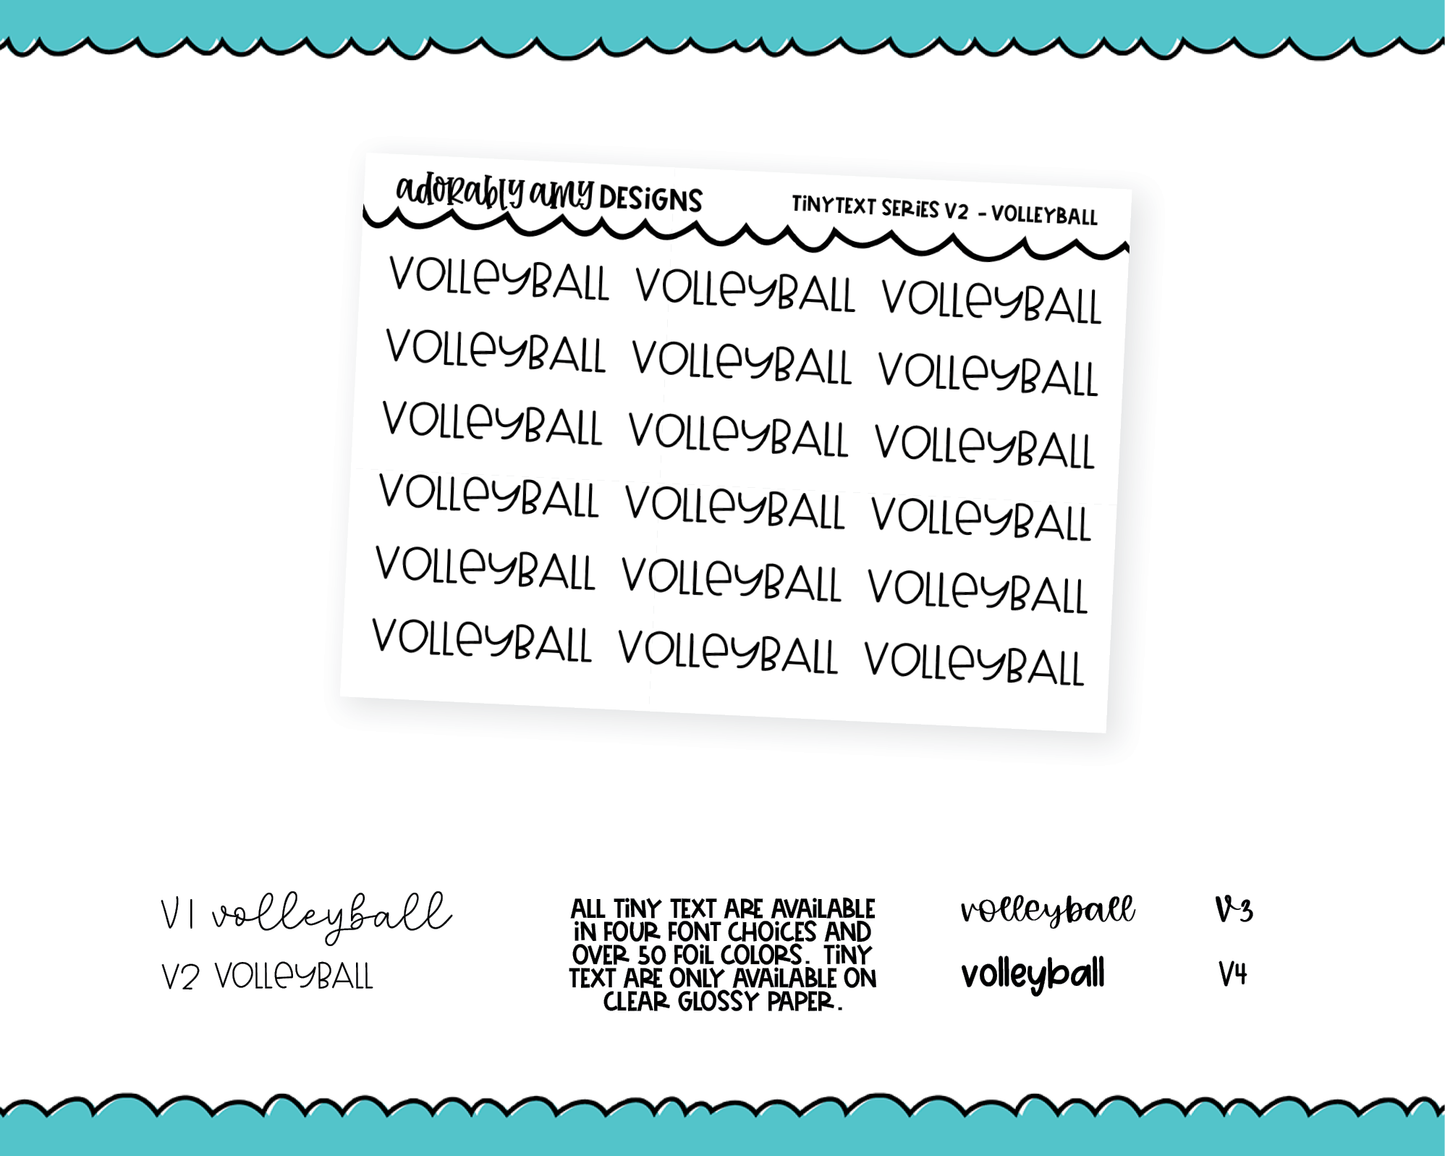 Foiled Tiny Text Series - Volleyball Checklist Size Planner Stickers for any Planner or Insert